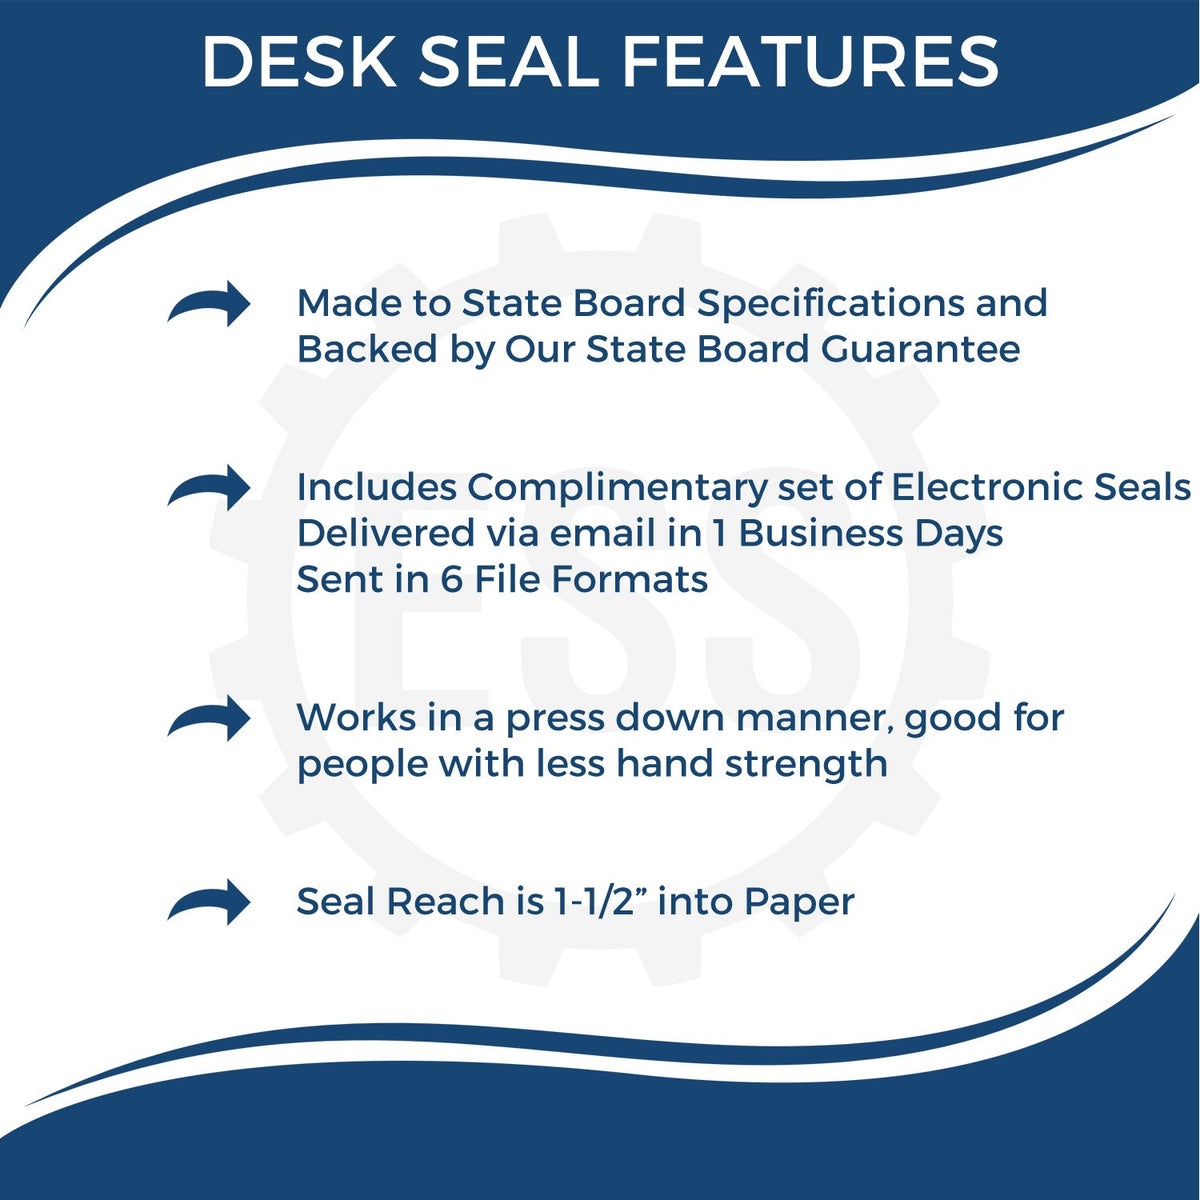 A picture of an infographic highlighting the selling points for the New York Engineer Desk Seal